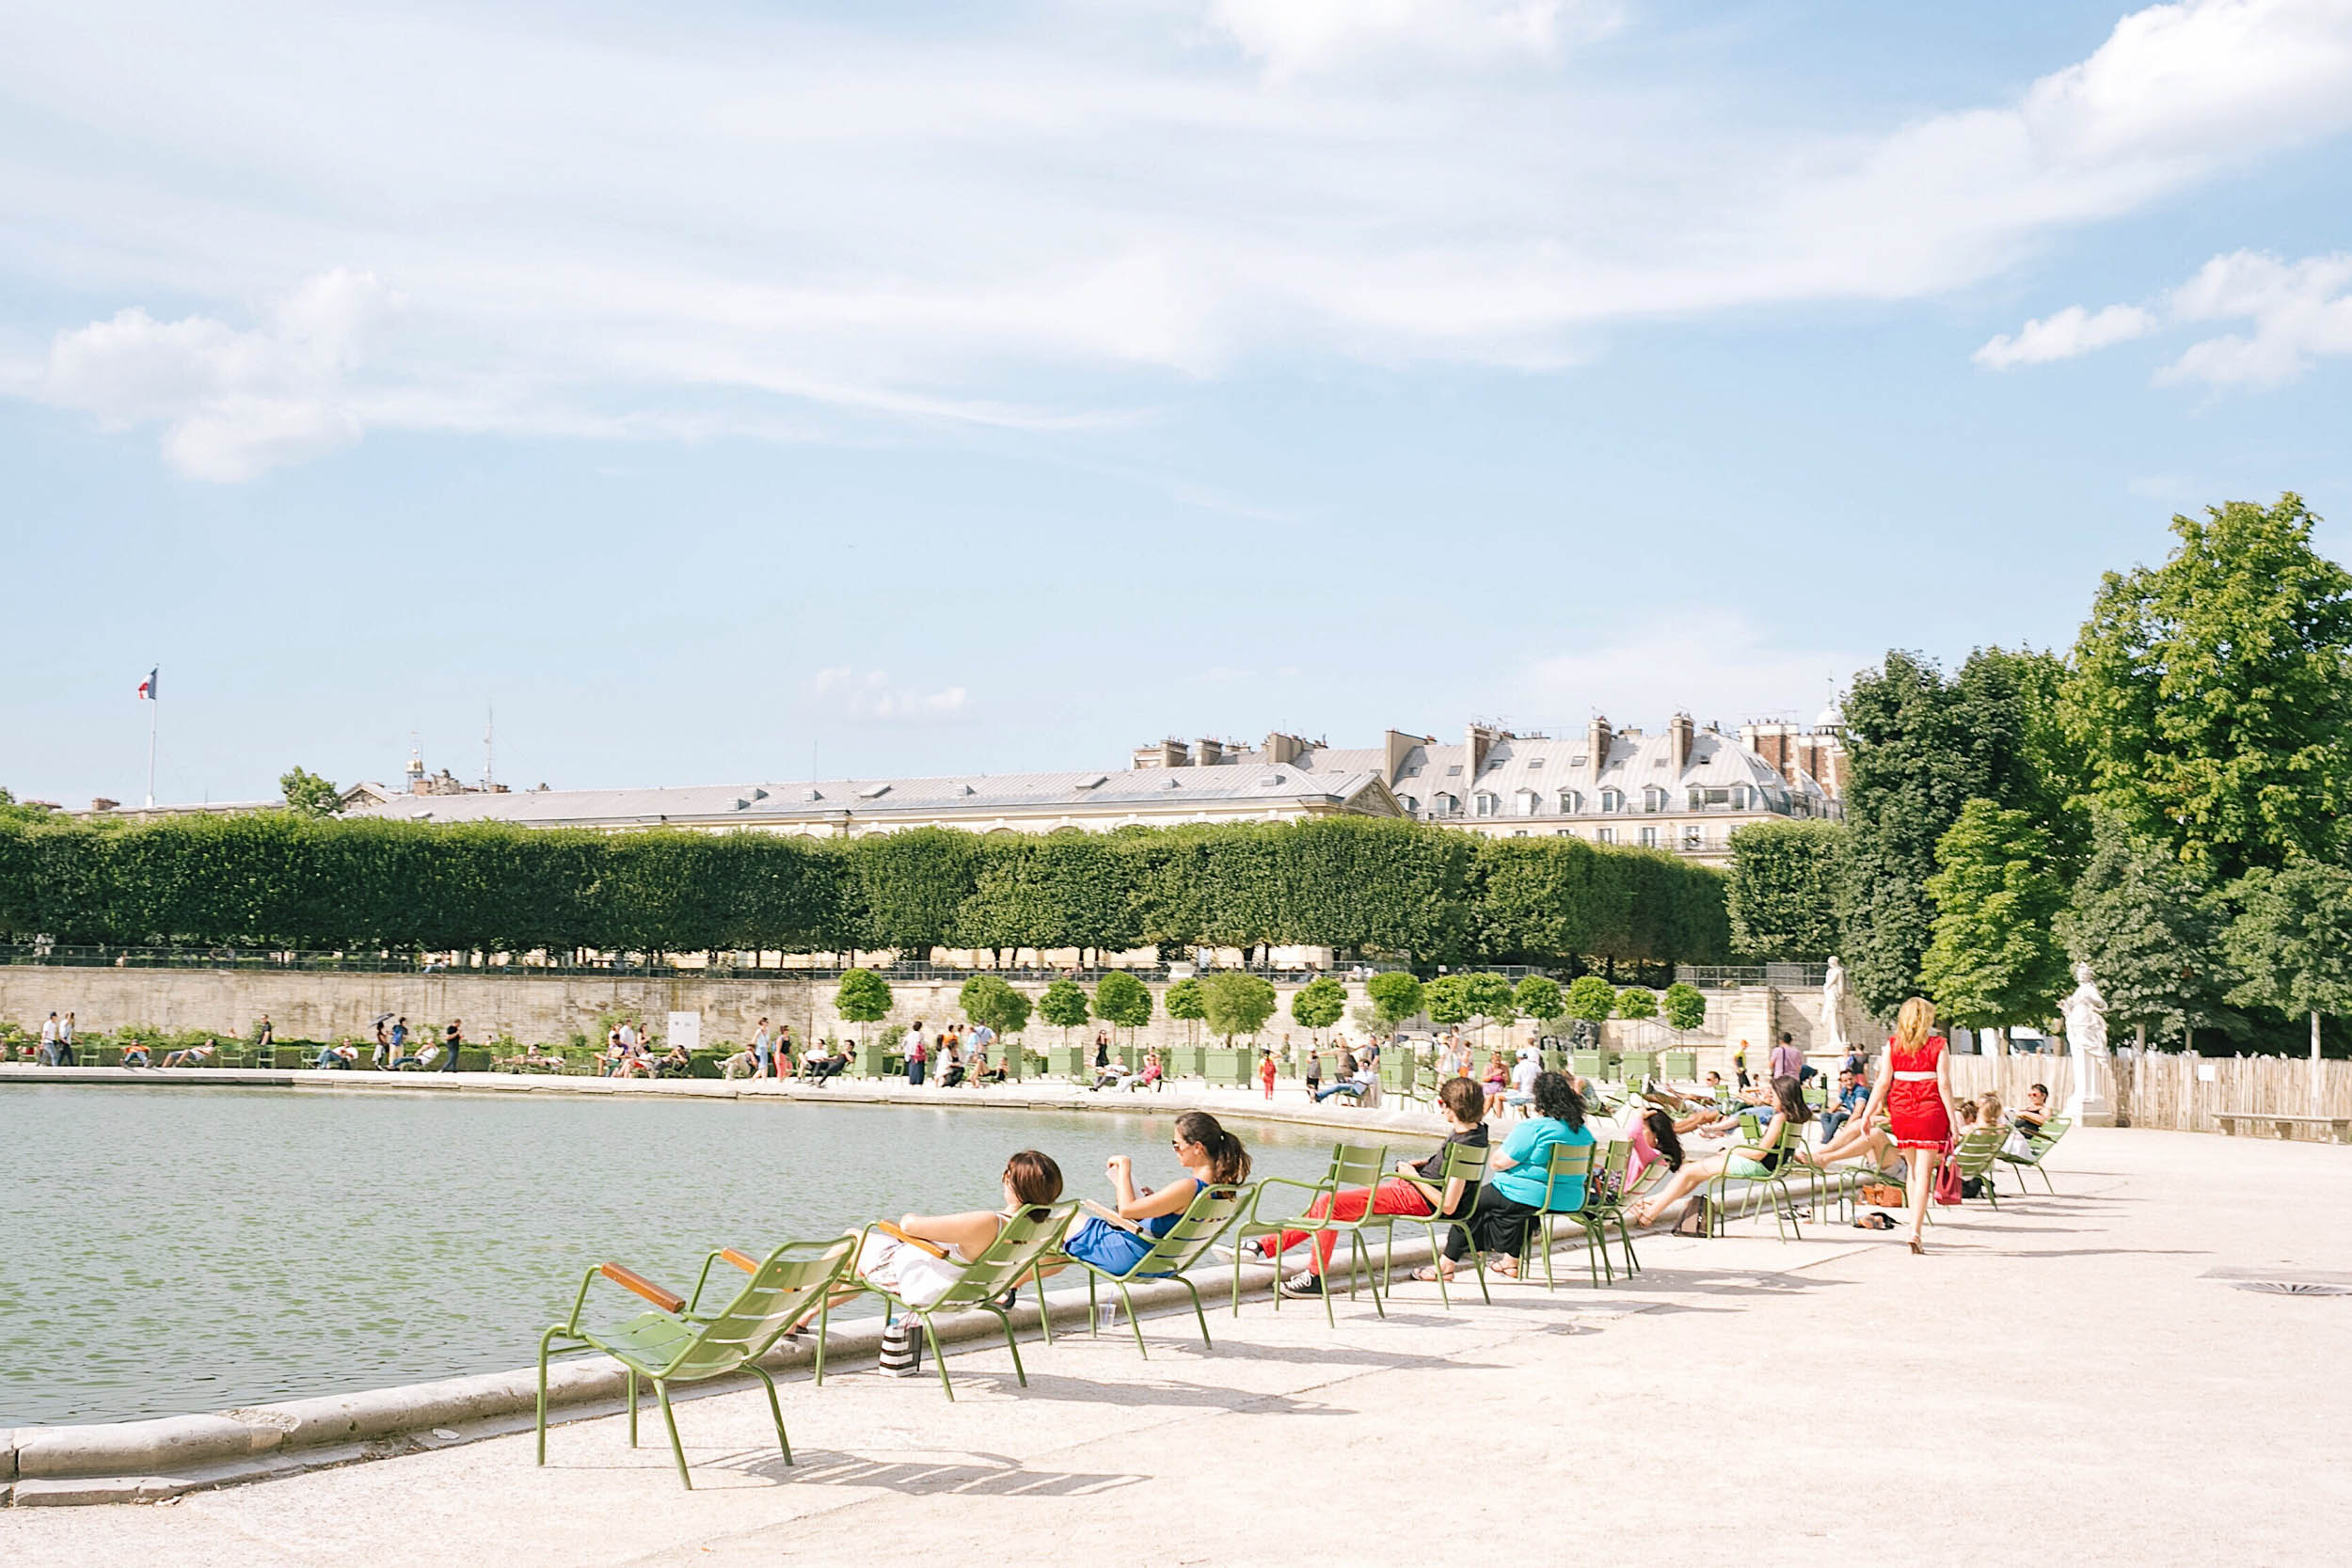 Summer in Paris - the Seine is lined with people dangling their feet over the edge, the Eiffel Tower lawn with picnic-goers, and every cafe, restaurant, and bar with outdoor diners.